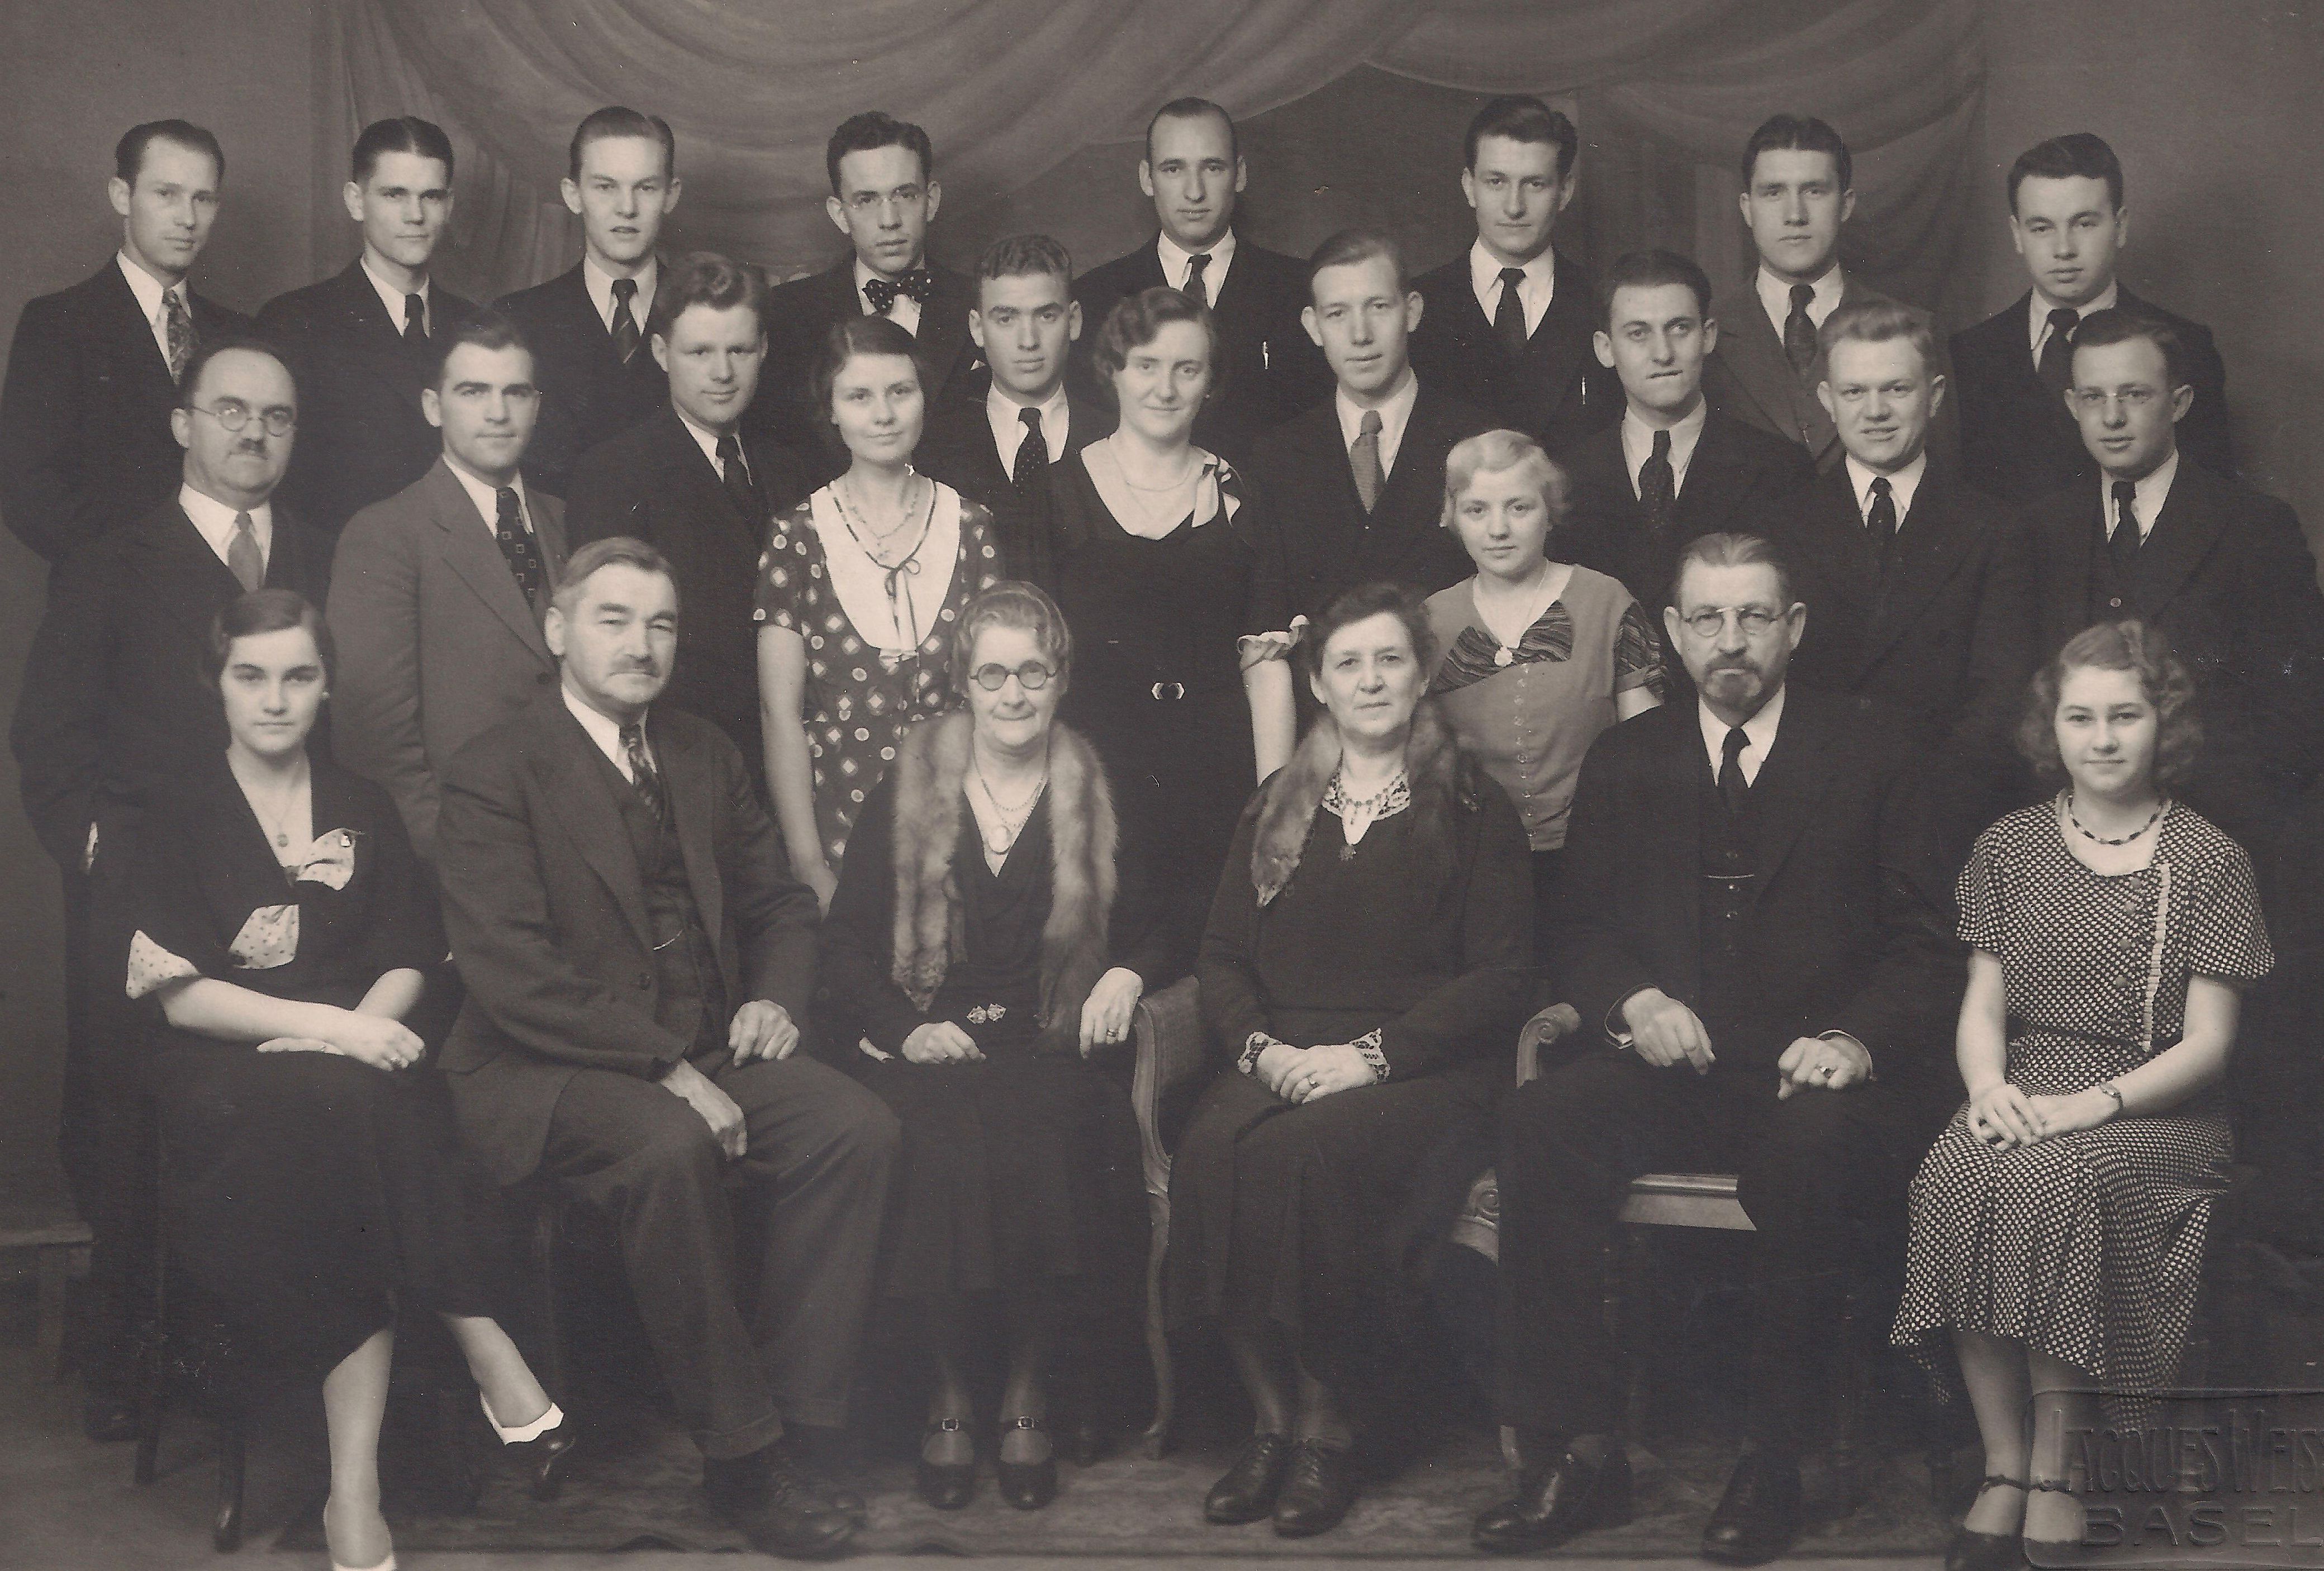 Basel Mission Conference May 27-28, 1933